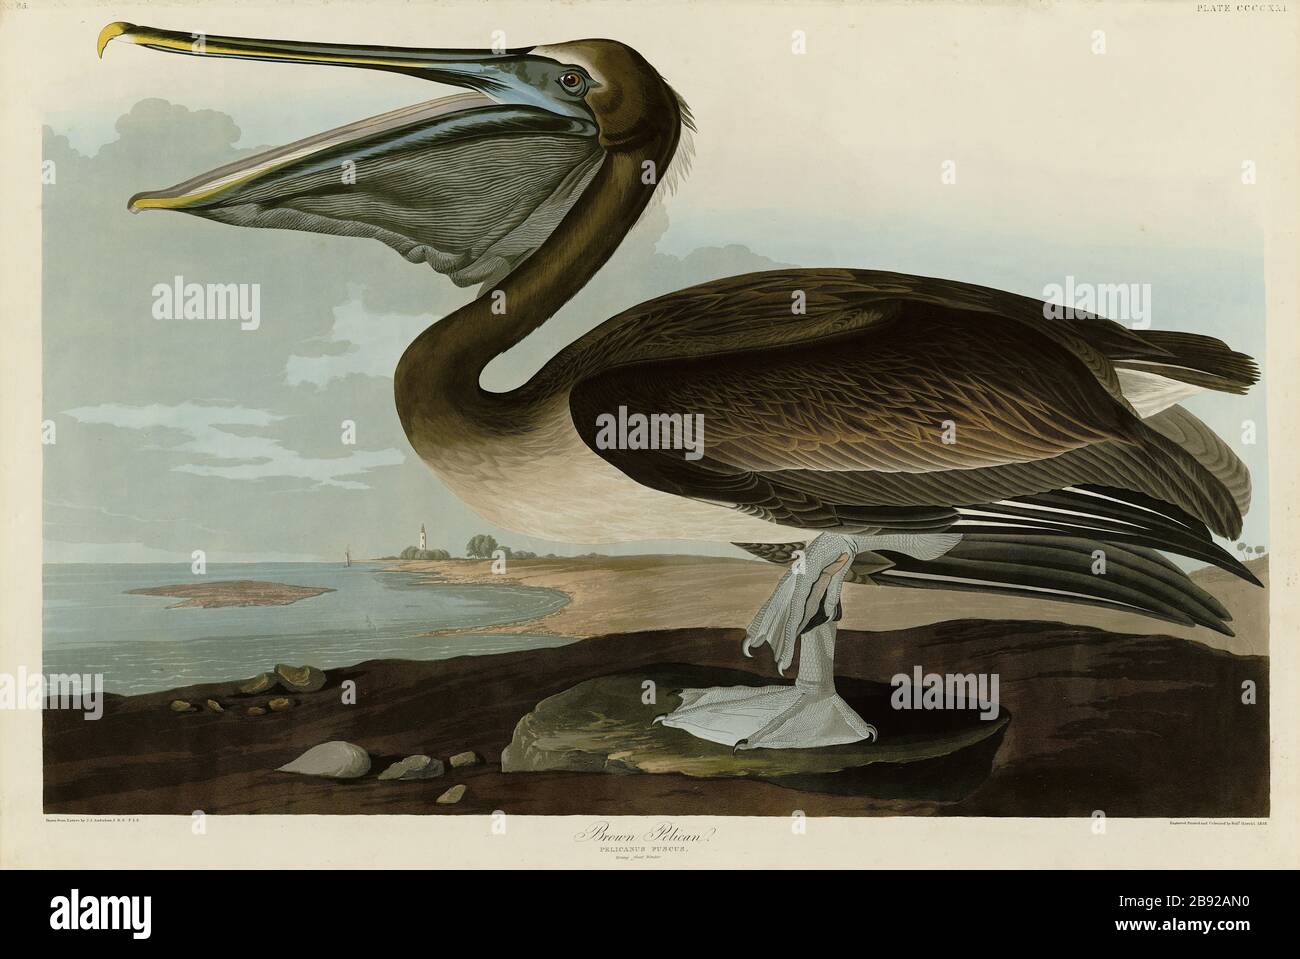 Plate 421 Brown Pelican, from The Birds of America folio (1827–1839) by John James Audubon - Very high resolution and quality edited image Stock Photo